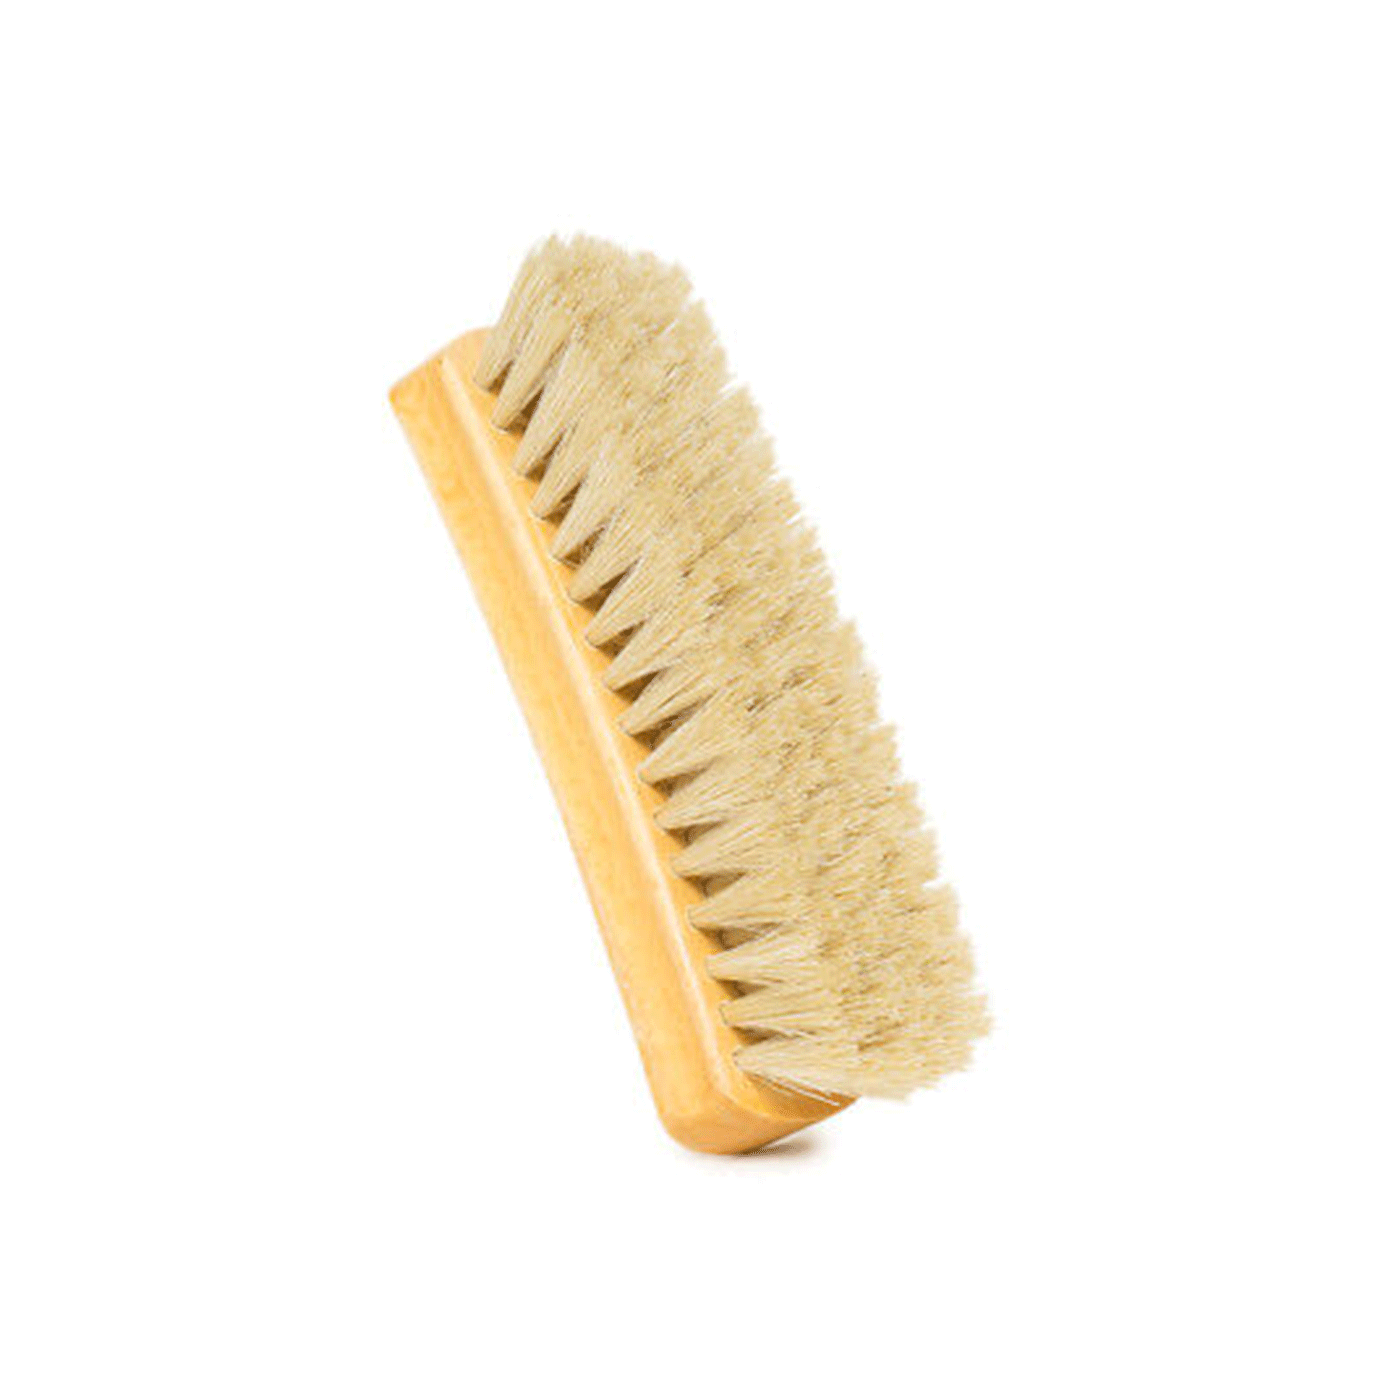 BRUSH FOR CARE OF SHOES/BOOTS/CLOTHES IN LIGHT HAIR